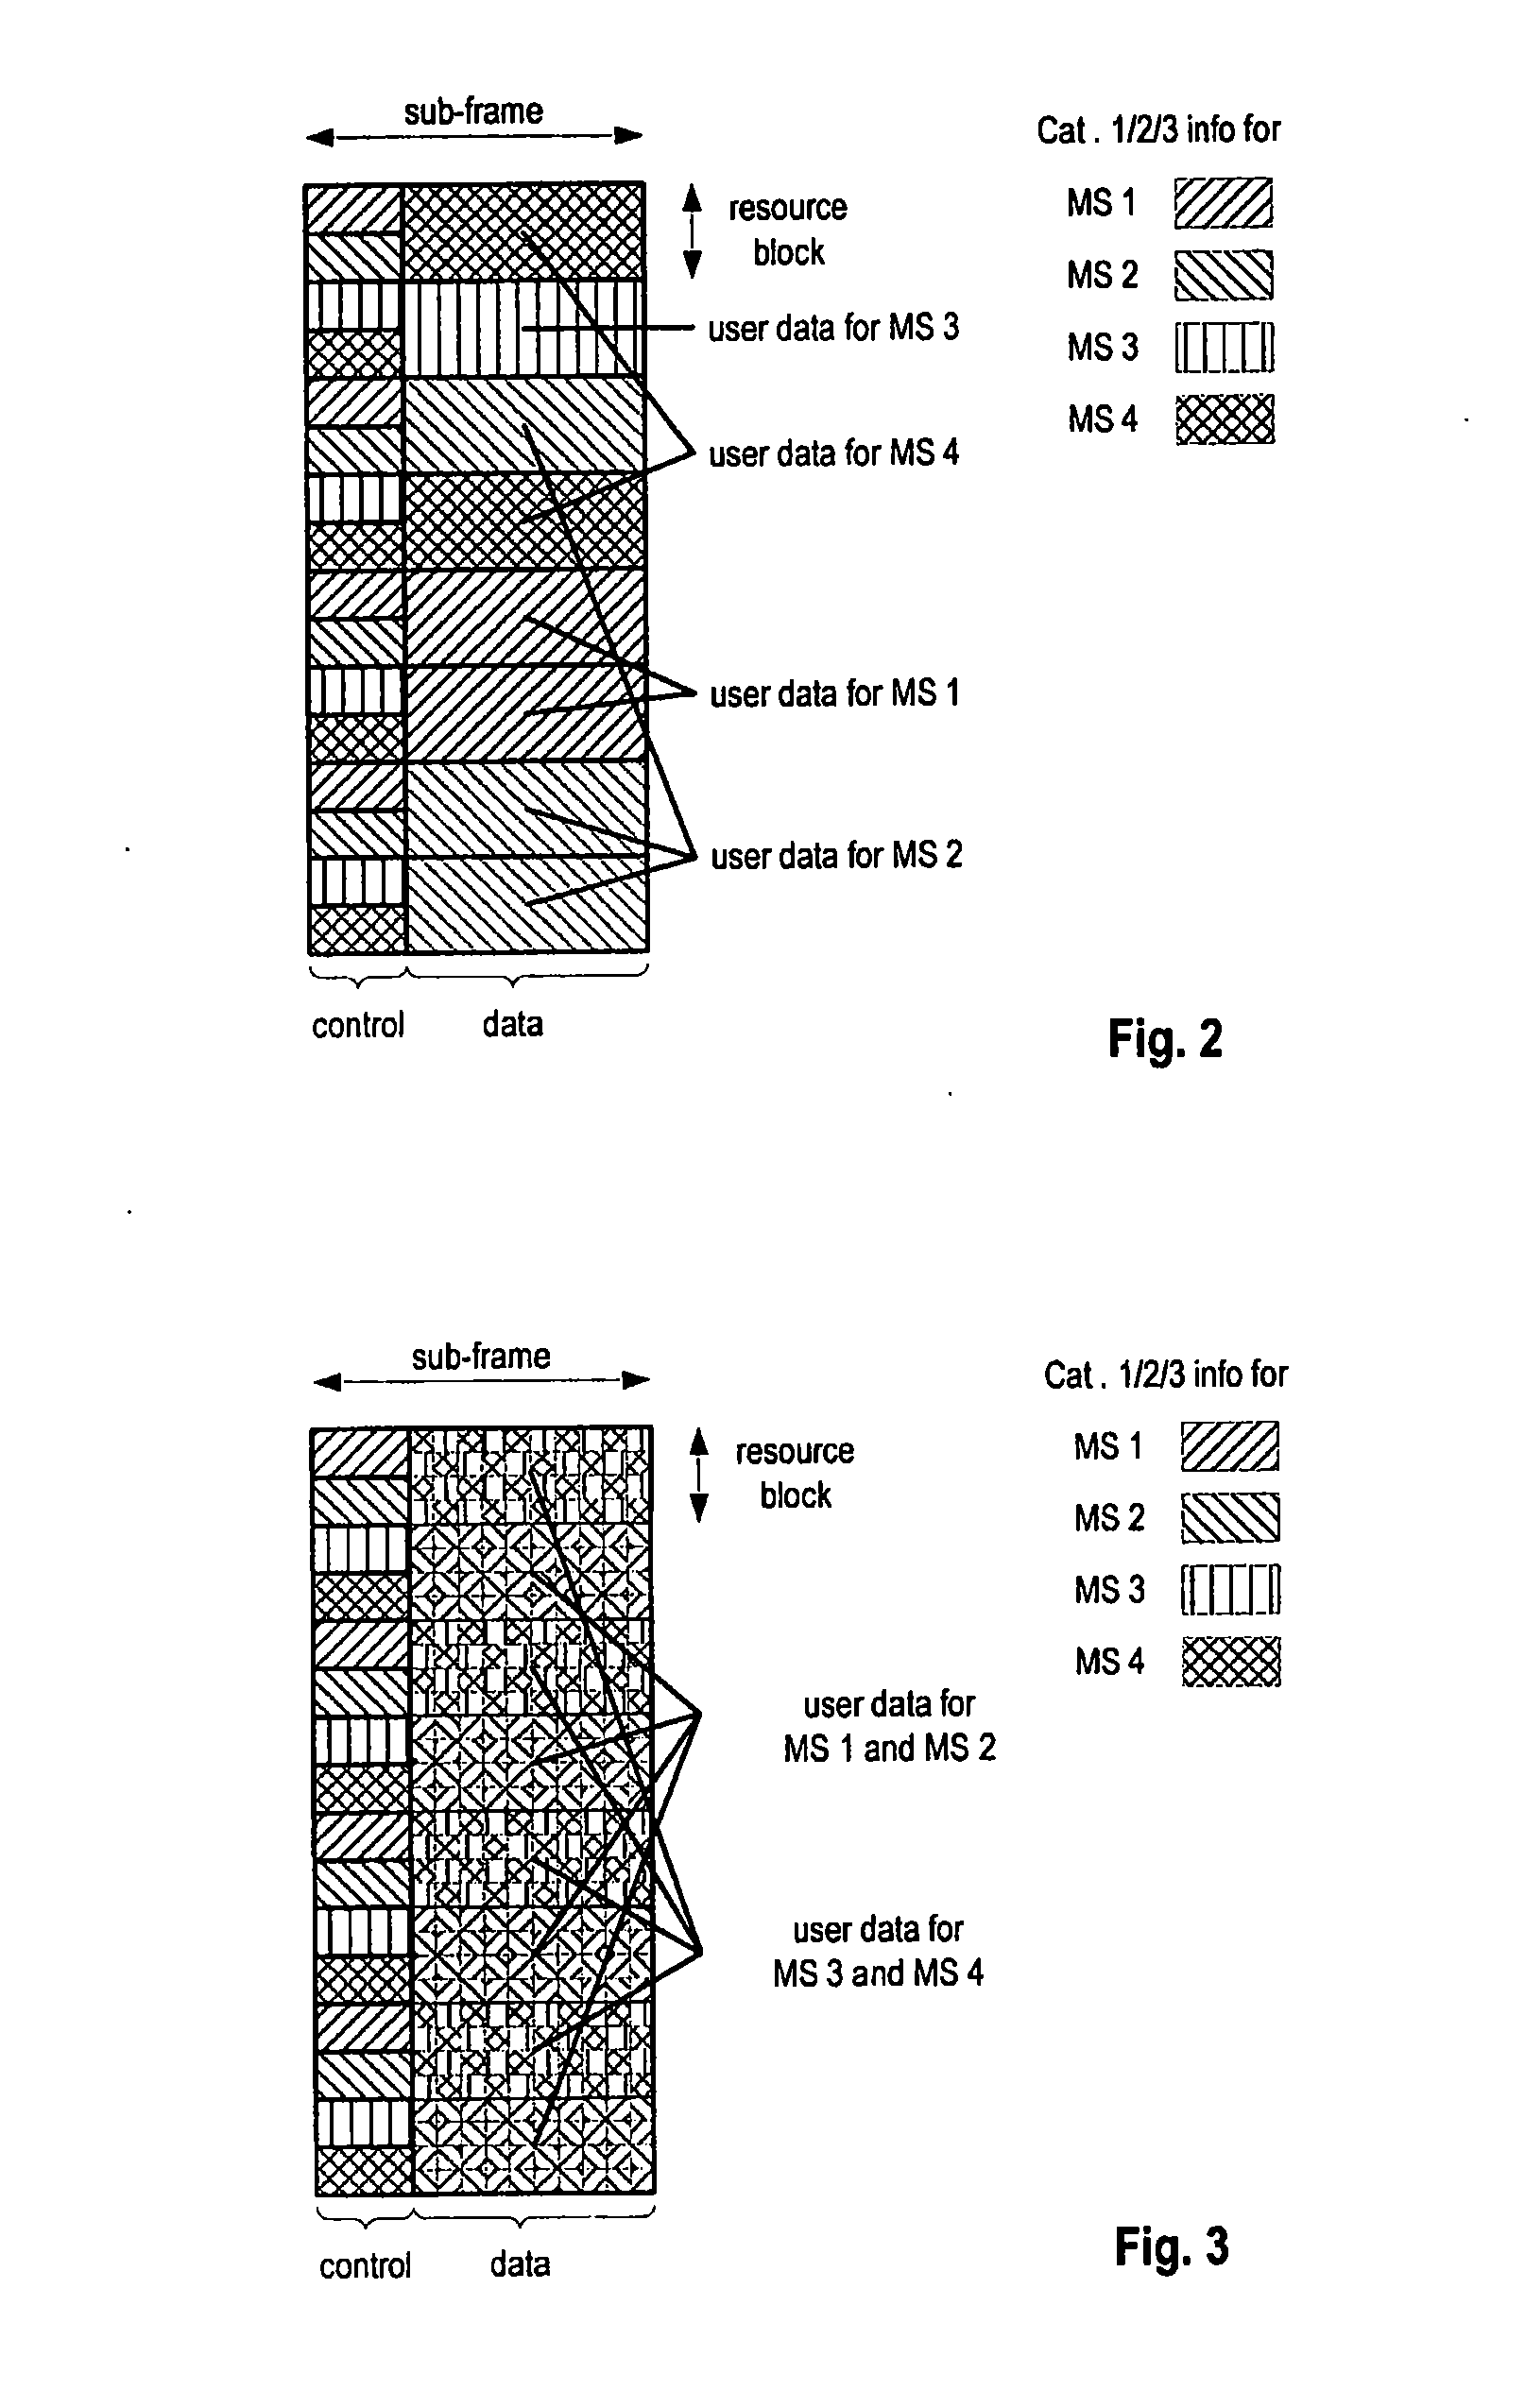 Control channel signaling using a common signaling field for transport format and redundancy version